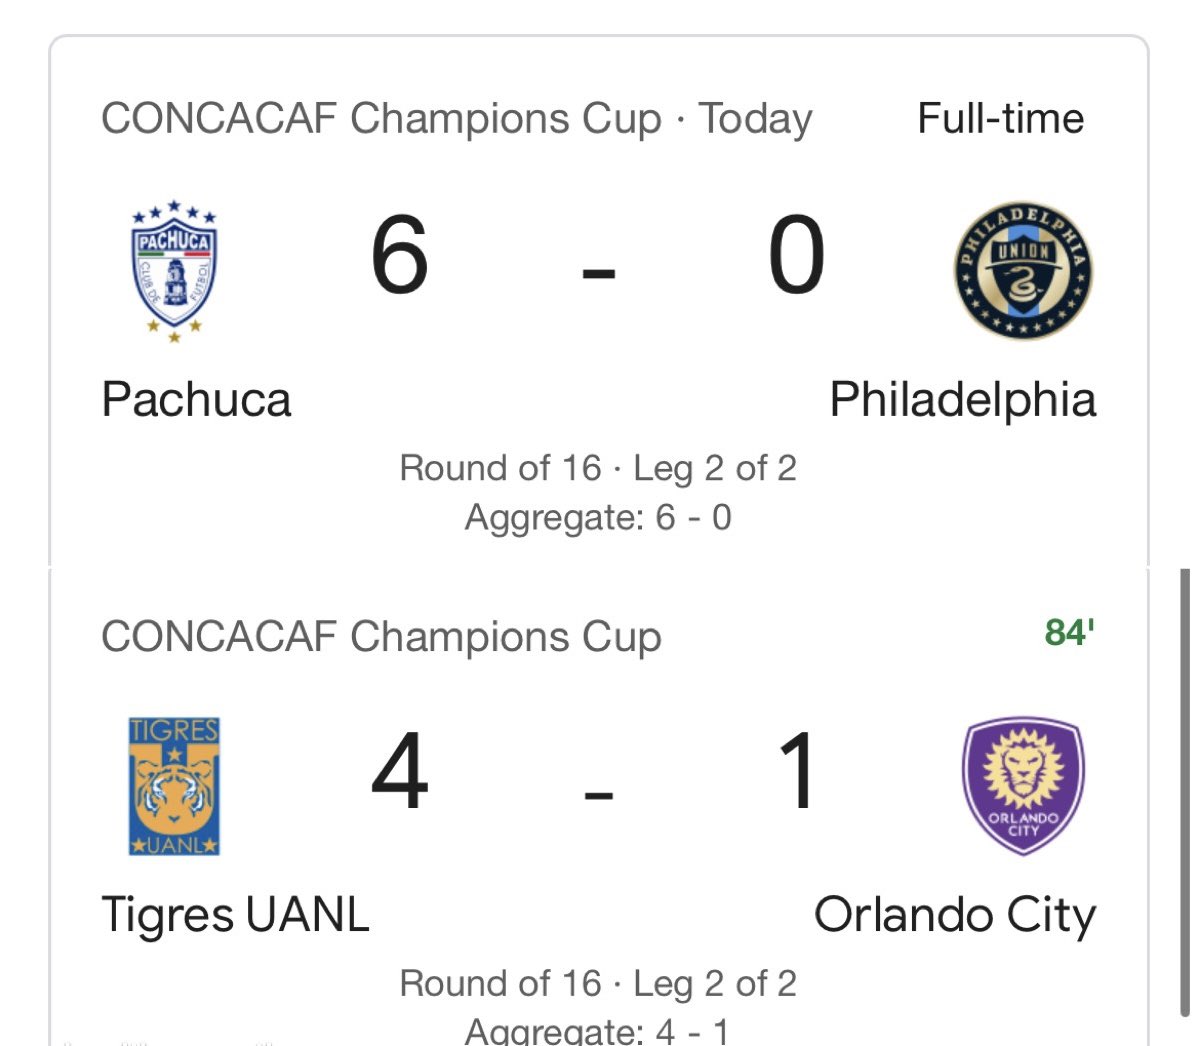 And this is why the Leagues Cup isn’t played in Mexico But we were told MLS closed the gap